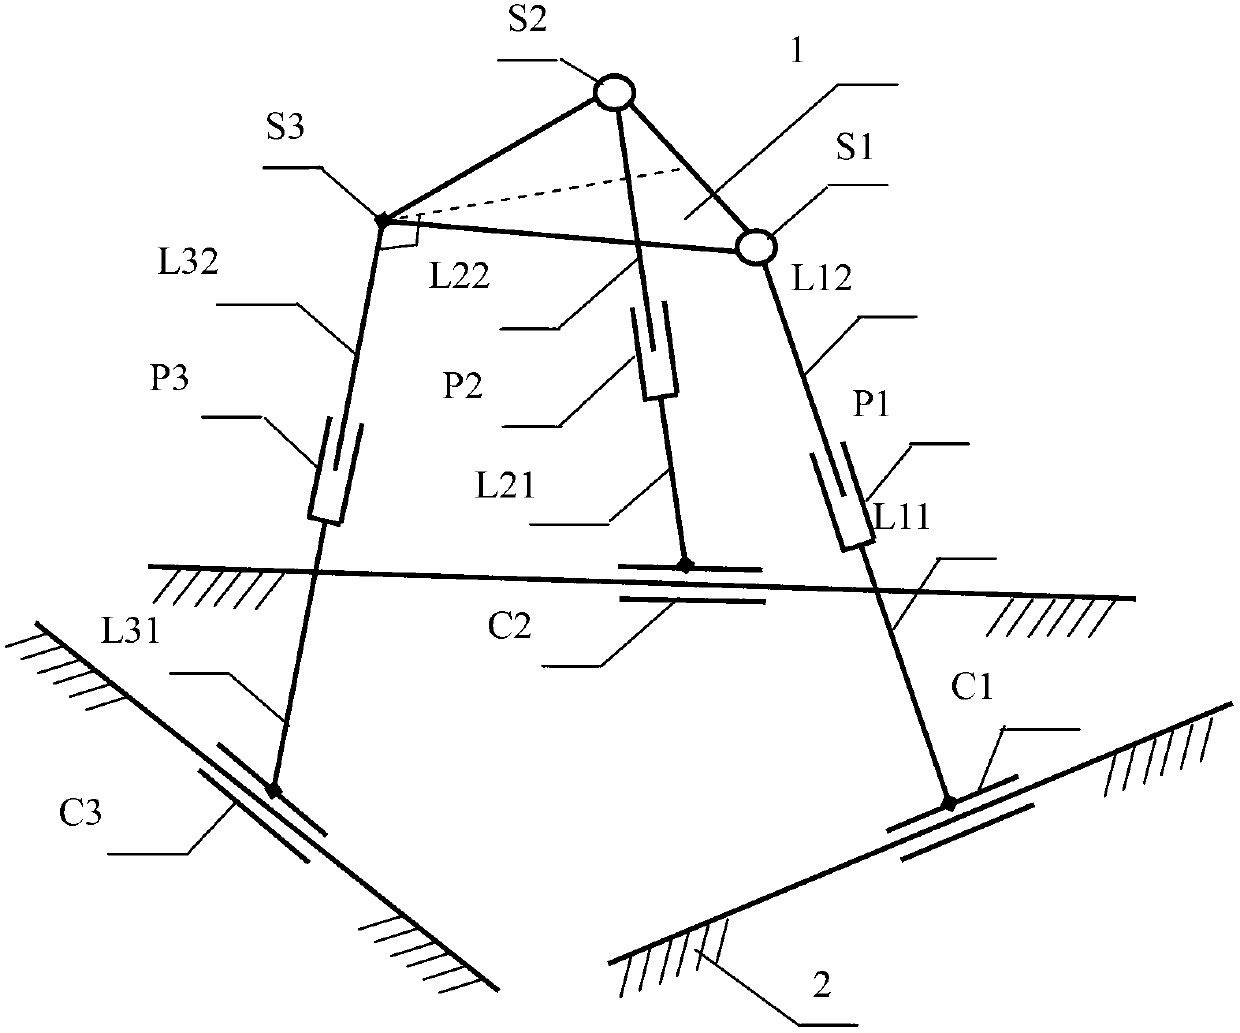 Three degree-of-freedom parallel mechanism with symmetrical space surfaces